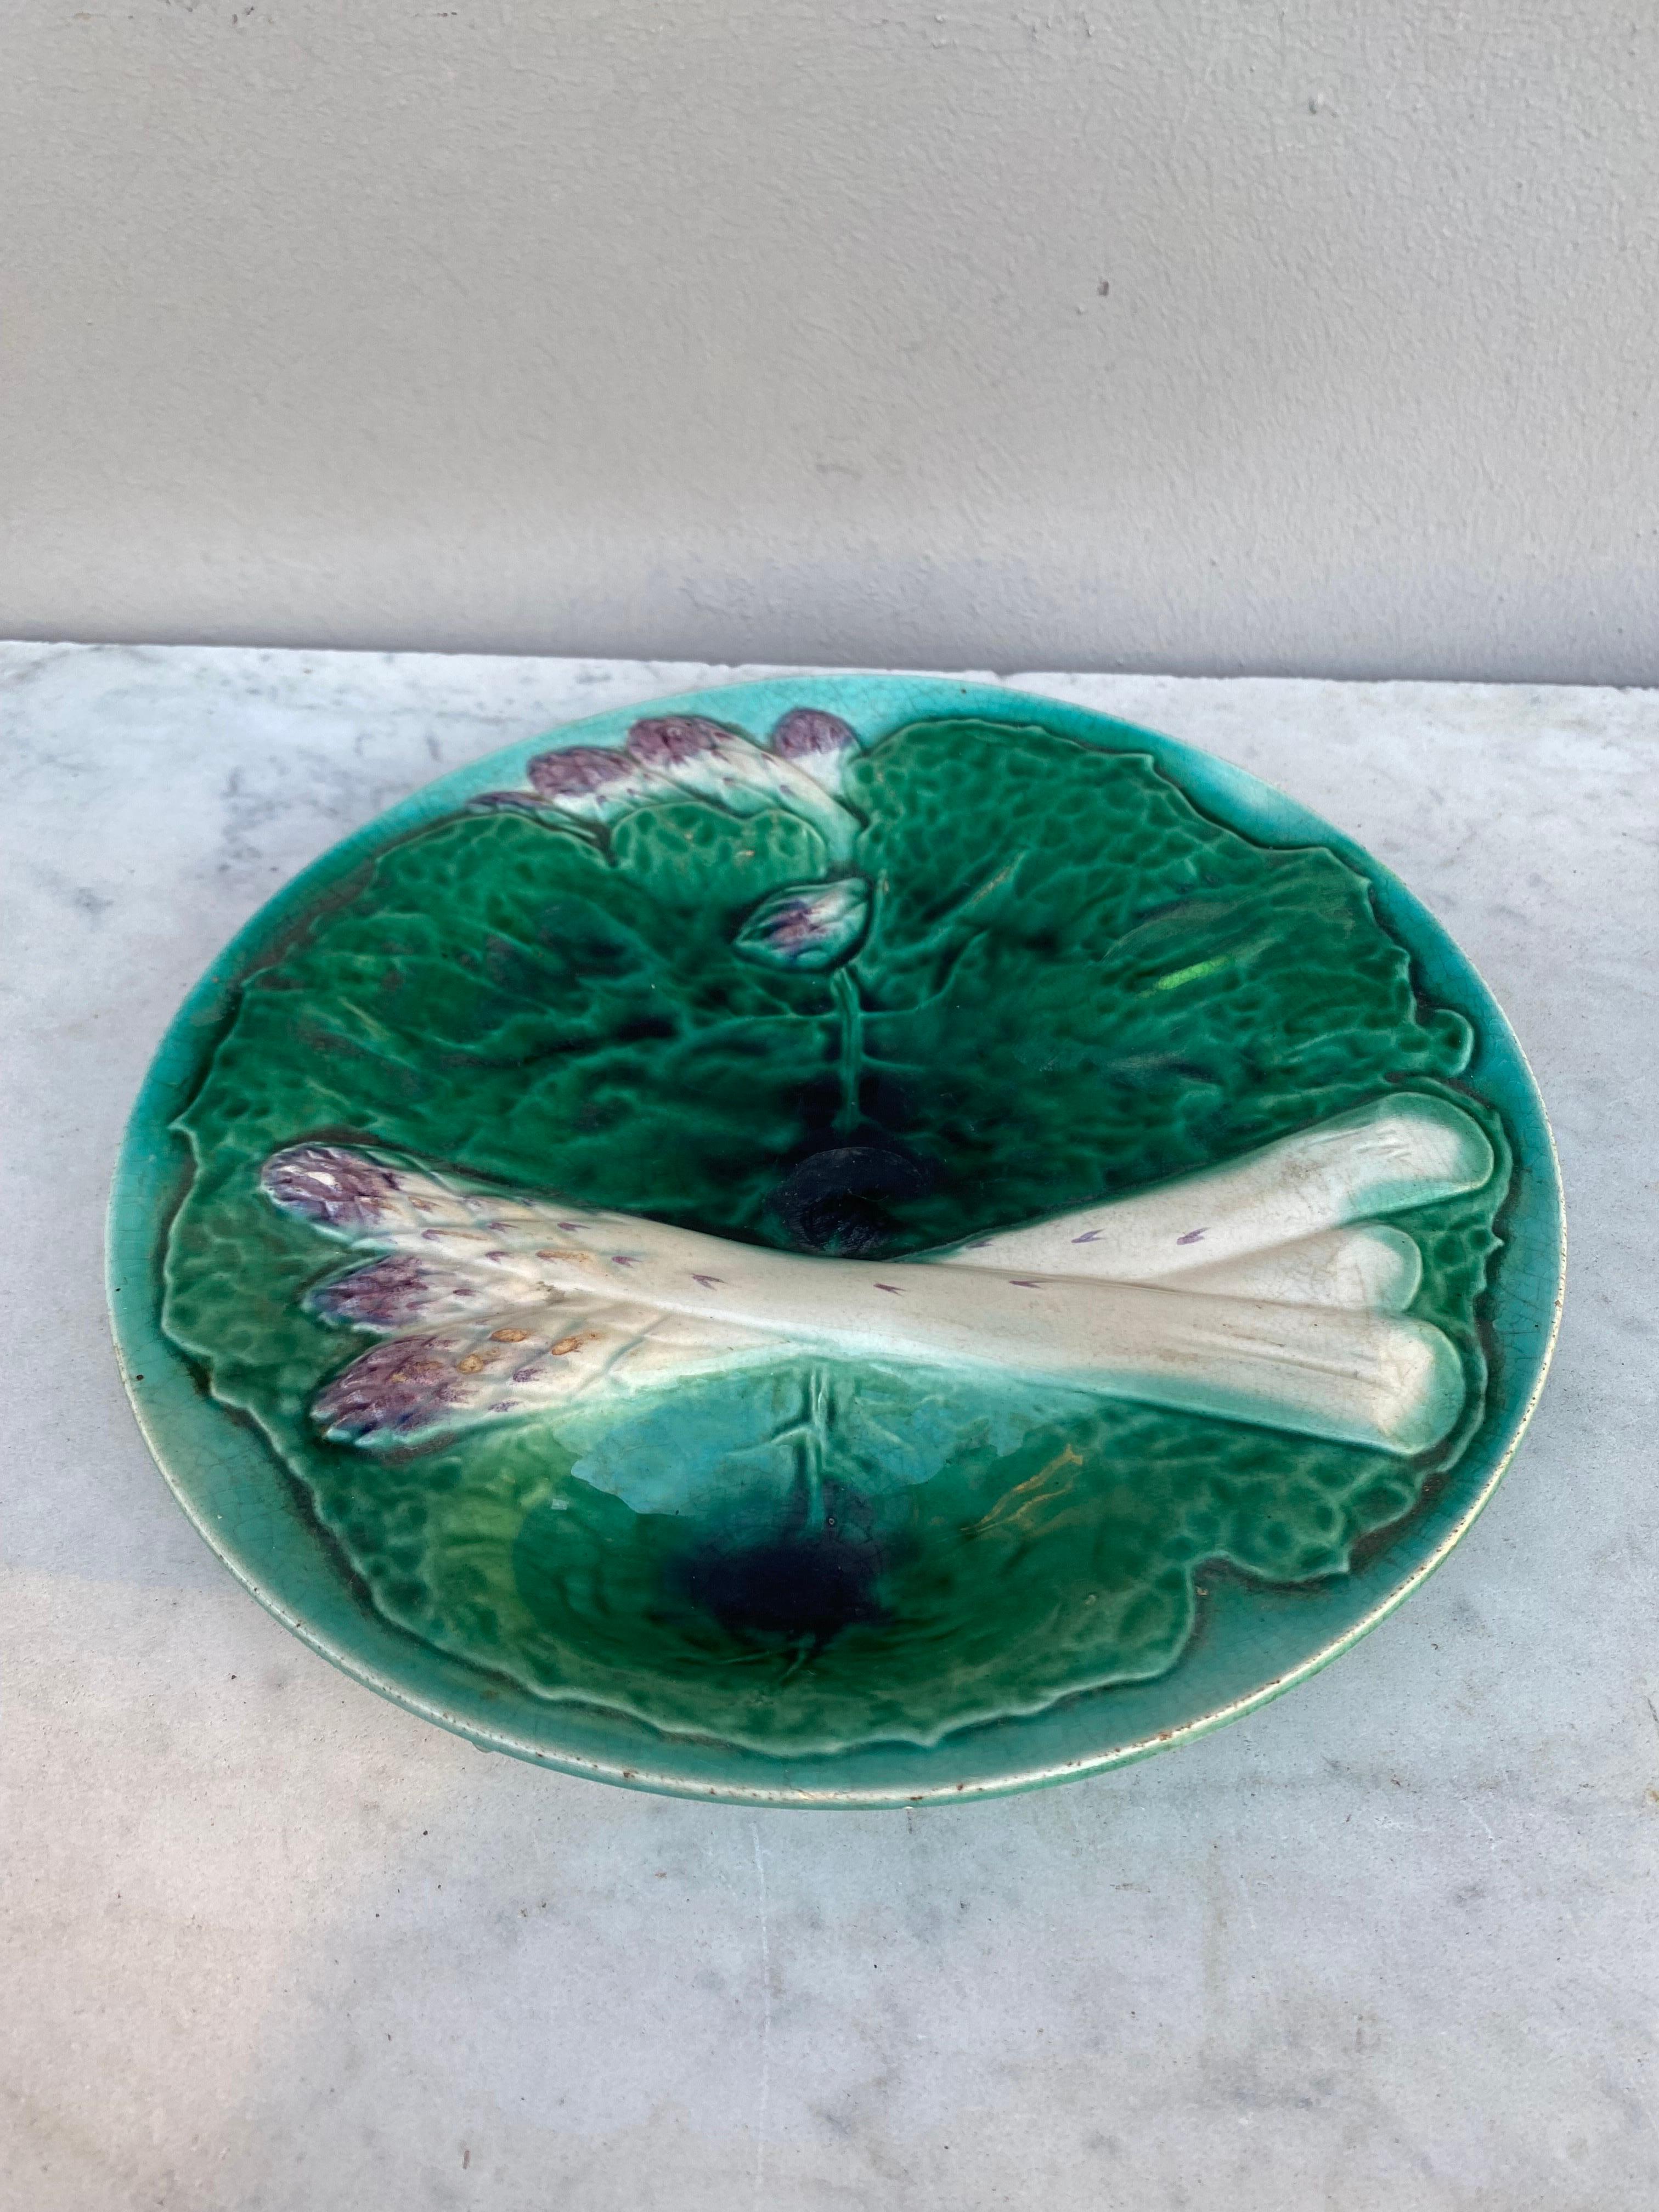 19th Century majolica asparagus plate with large green cabbages leaves by the Manufacture of Creil and Montereau.
 